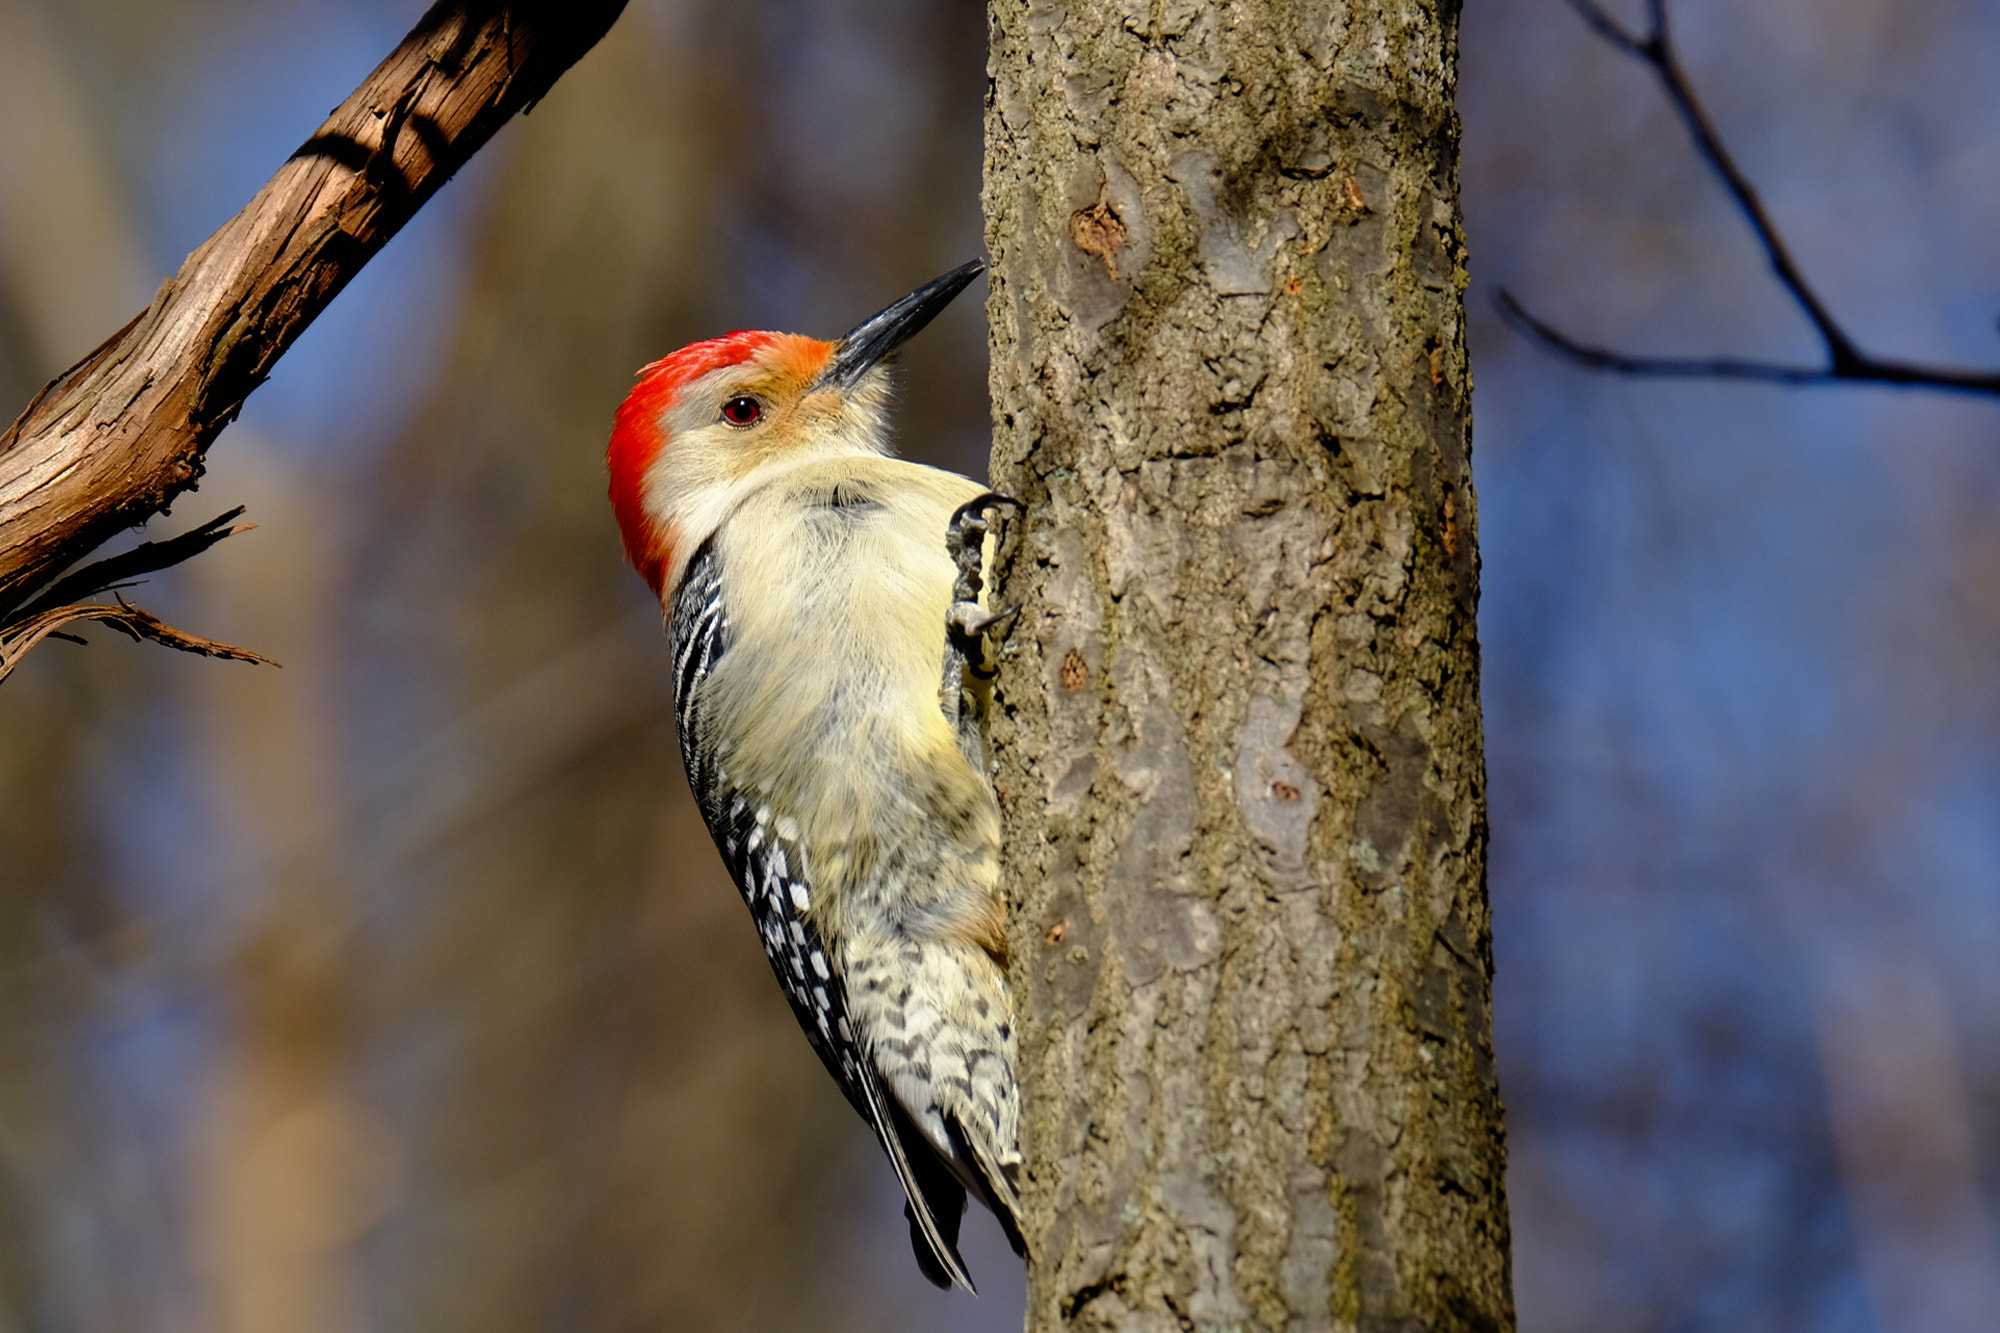 Fujifilm X-T10 + XF100-400mmF4.5-5.6 R LM OIS WR + 1.4x sample photo. Red-bellied woodpecker photography